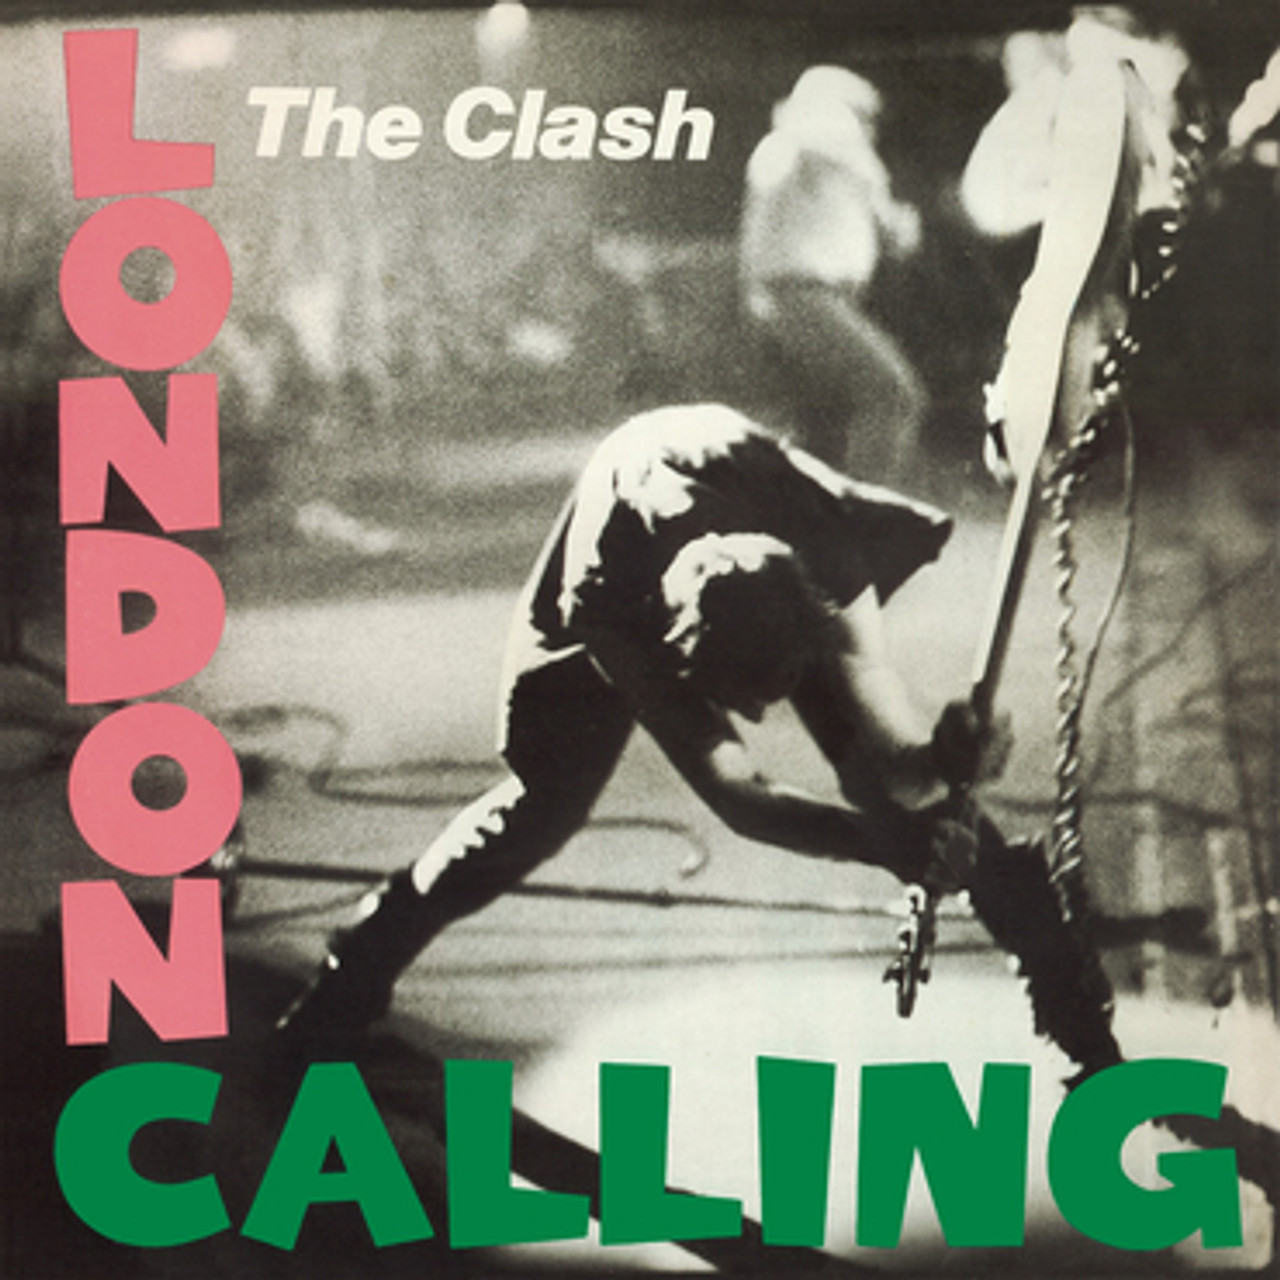 London Calling by The Clash